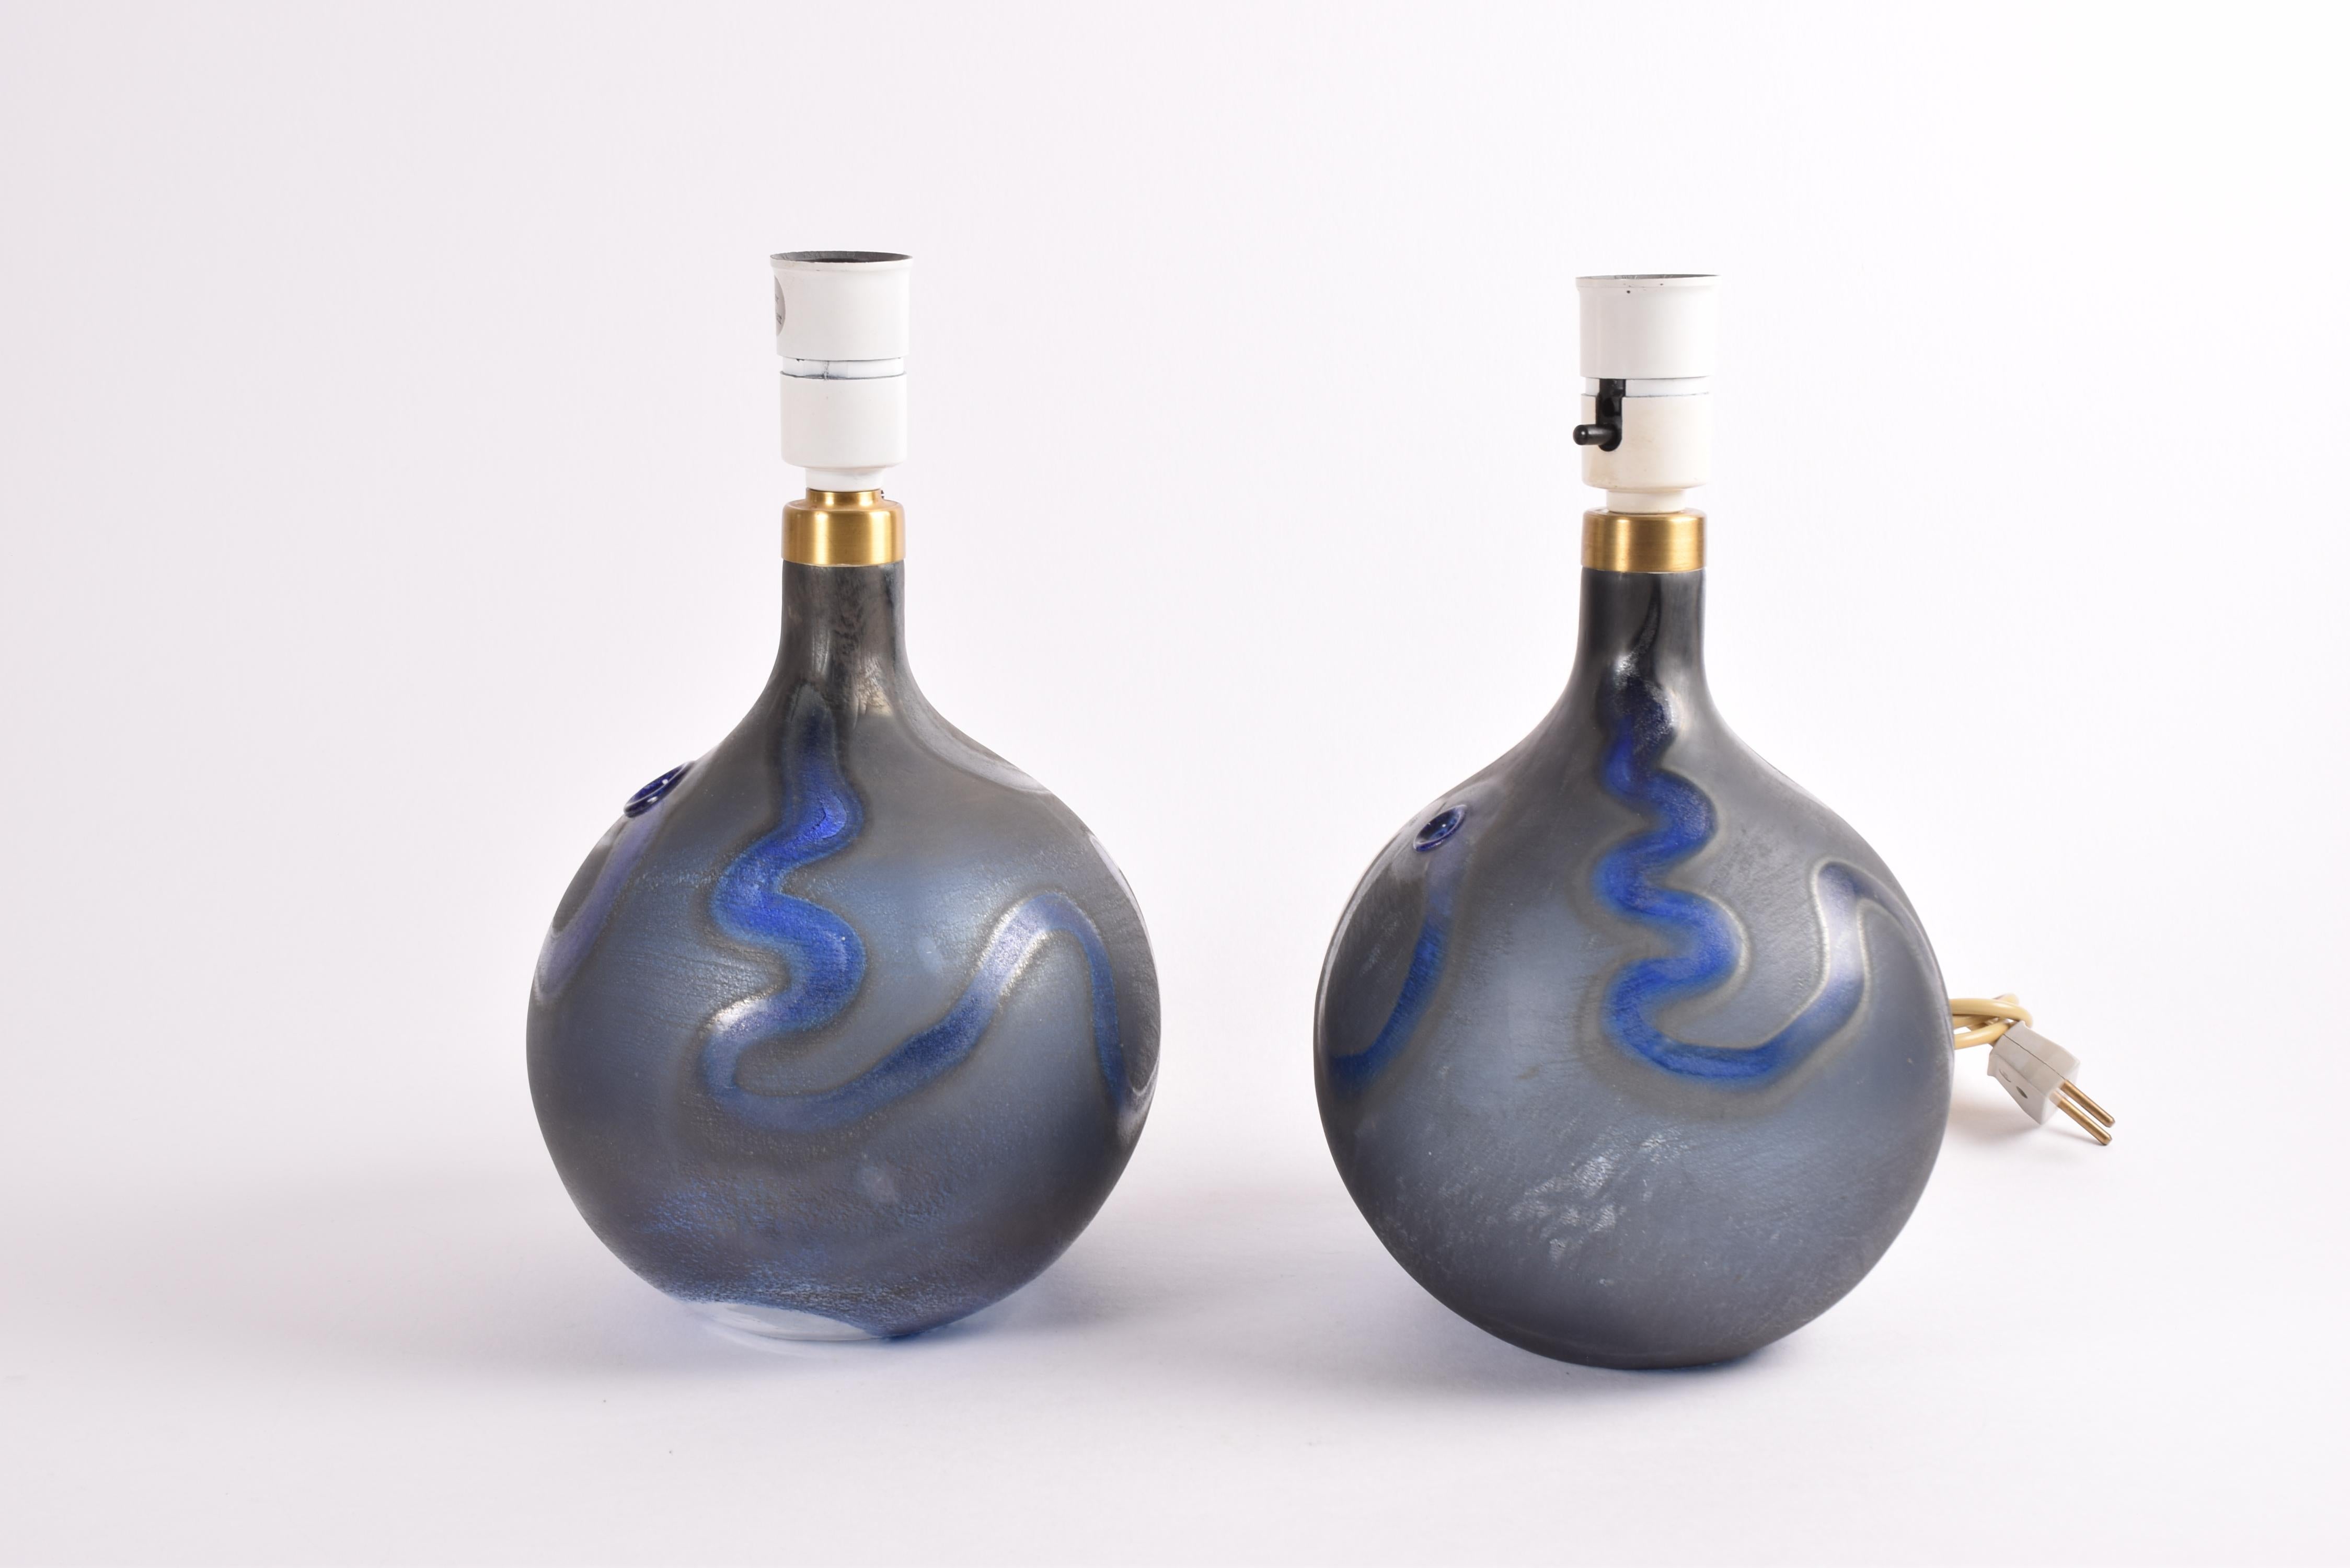 Pair of Holmegaard Blue Sculptural Glass Table Lamps Medium, Danish Modern 1970s For Sale 2